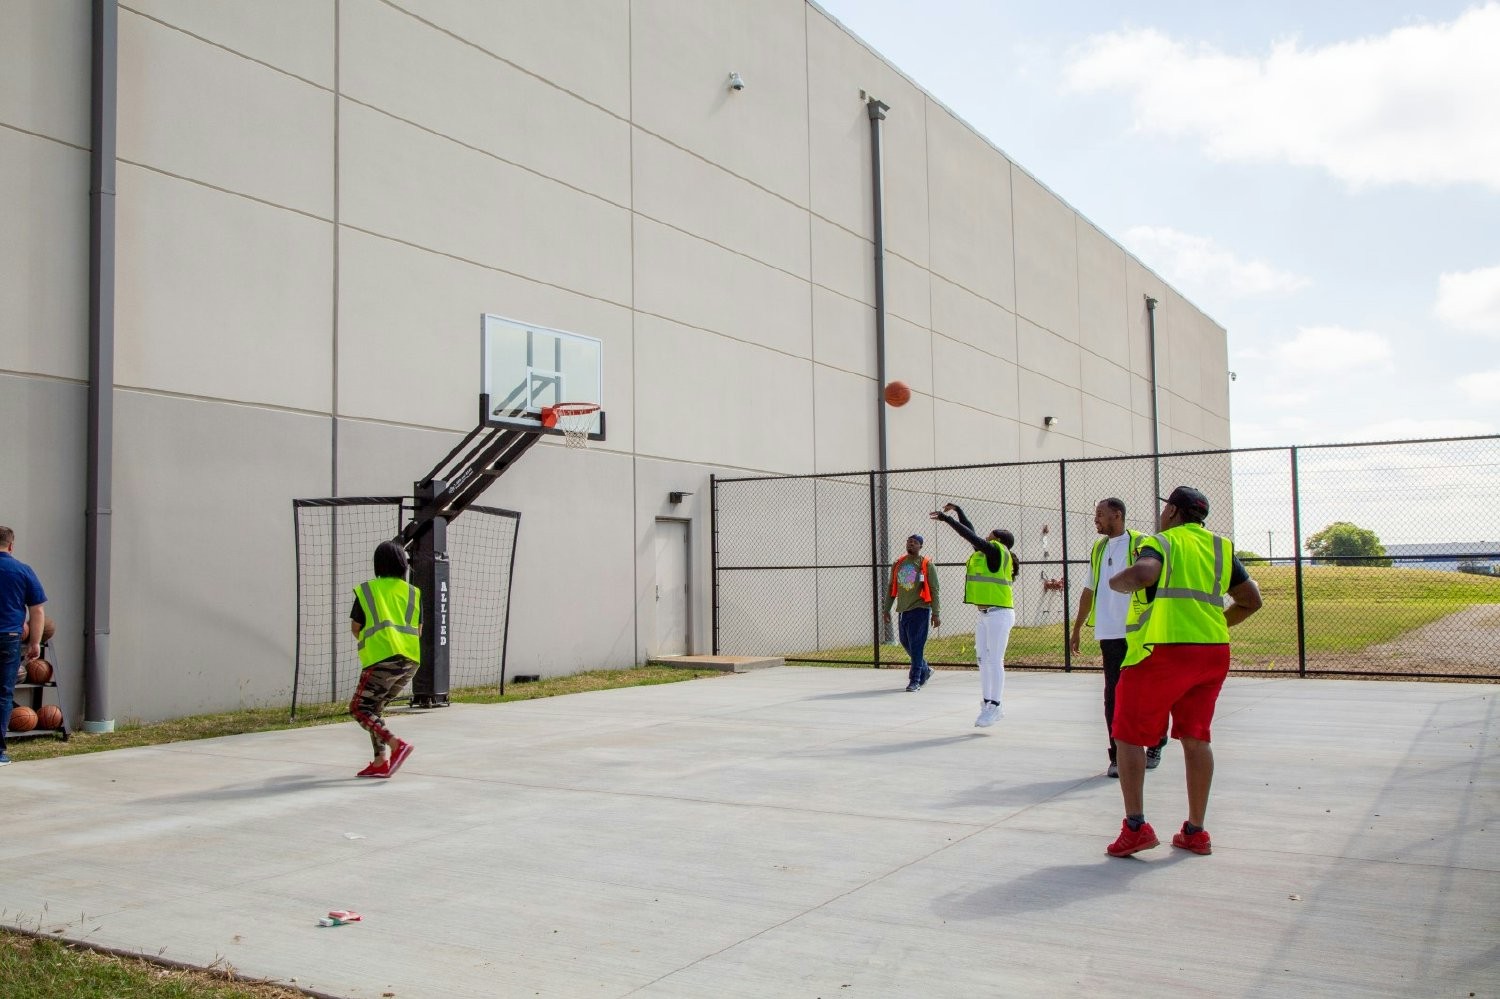 Allied Electronics & Automation employees taking a break in the new basketball court at the hybrid office in Dallas-Fort Worth